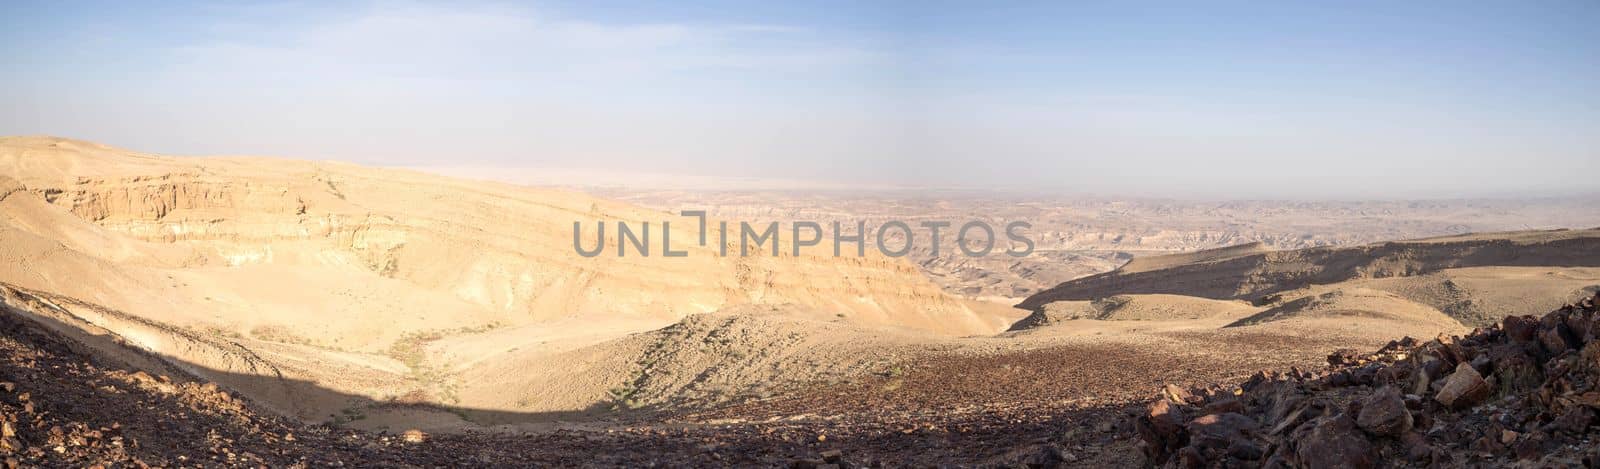 Wide angle panorama of Desert landscape by javax